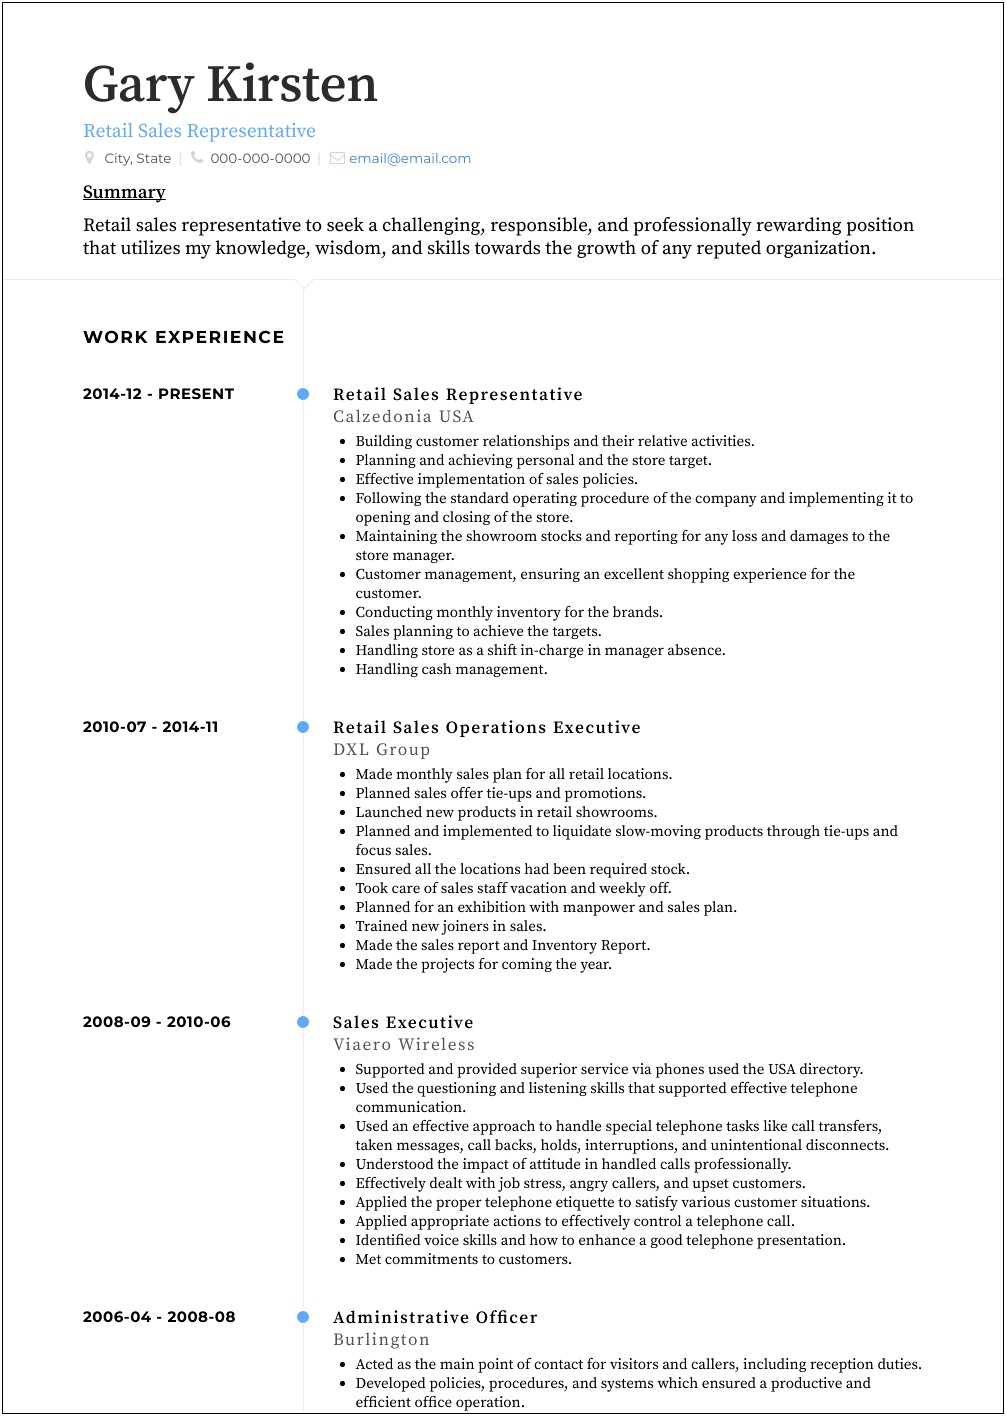 Example Of An At&t Retail Resume